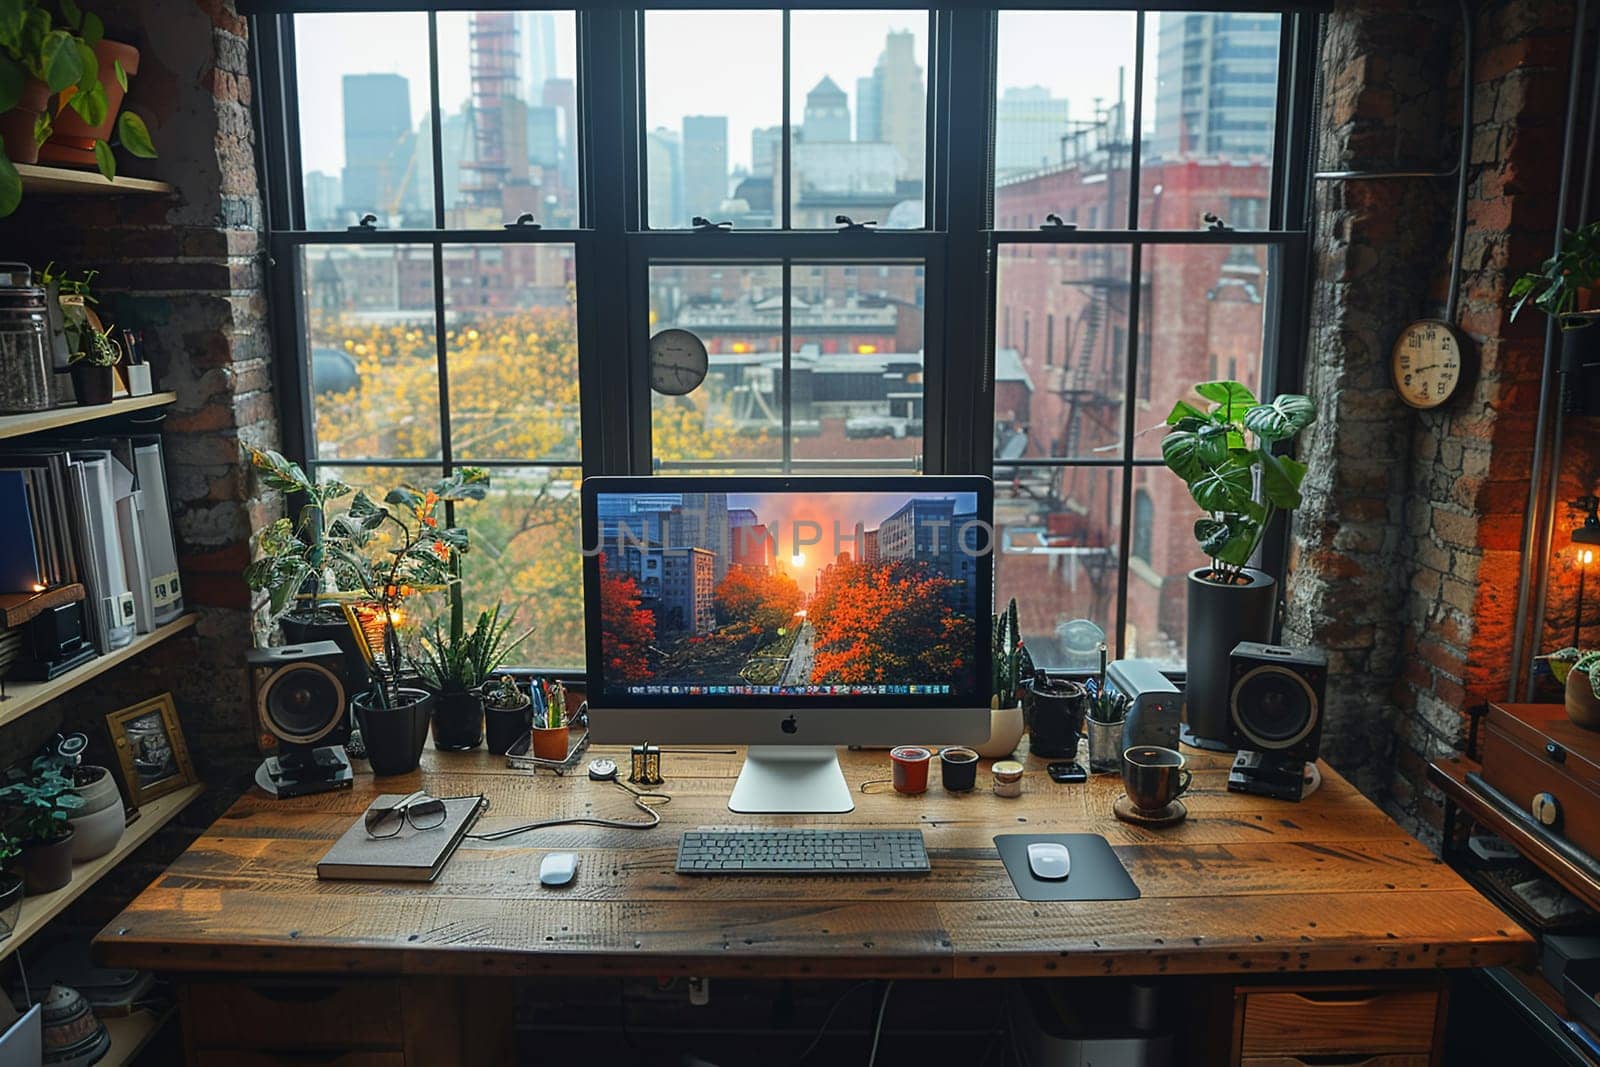 Neatly organized home office workspace, epitomizing productivity and modern work life.